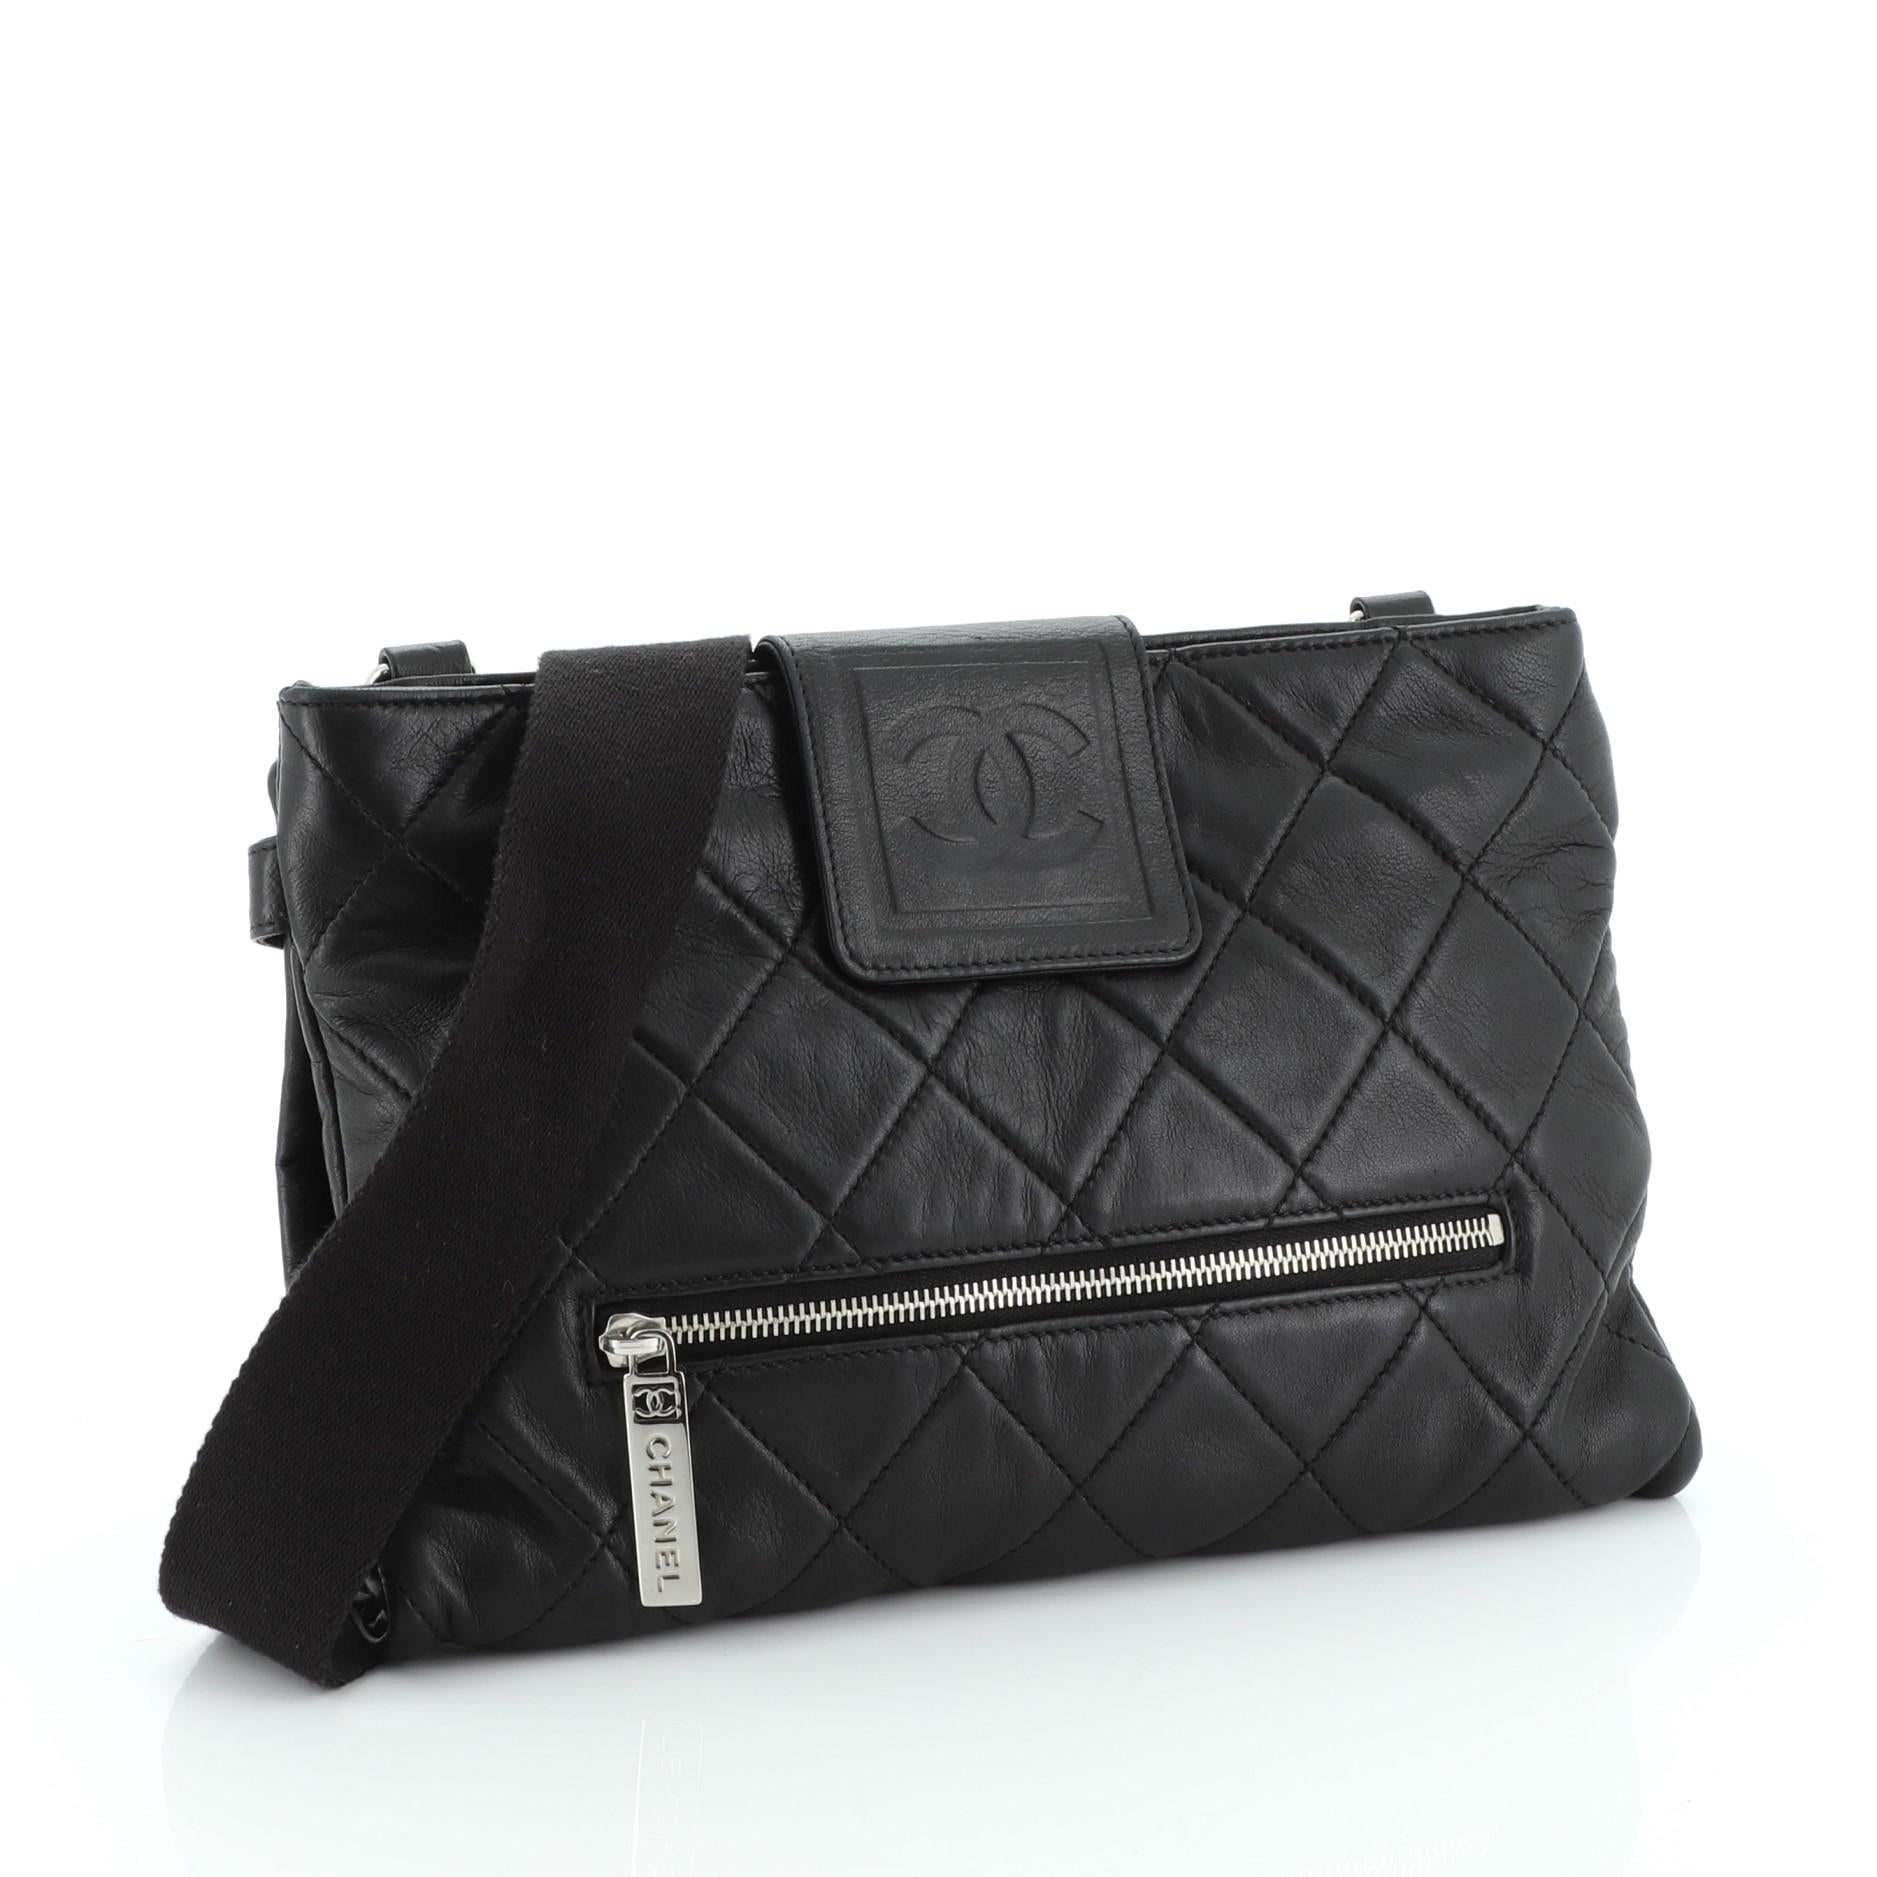 This Chanel Sport Line Zip Messenger Bag Quilted Lambskin Medium, crafted from black quilted lambskin leather, features long shoulder strap, exterior front zip pocket, and silver-tone hardware. Its flap tab and zip closure opens to a black fabric